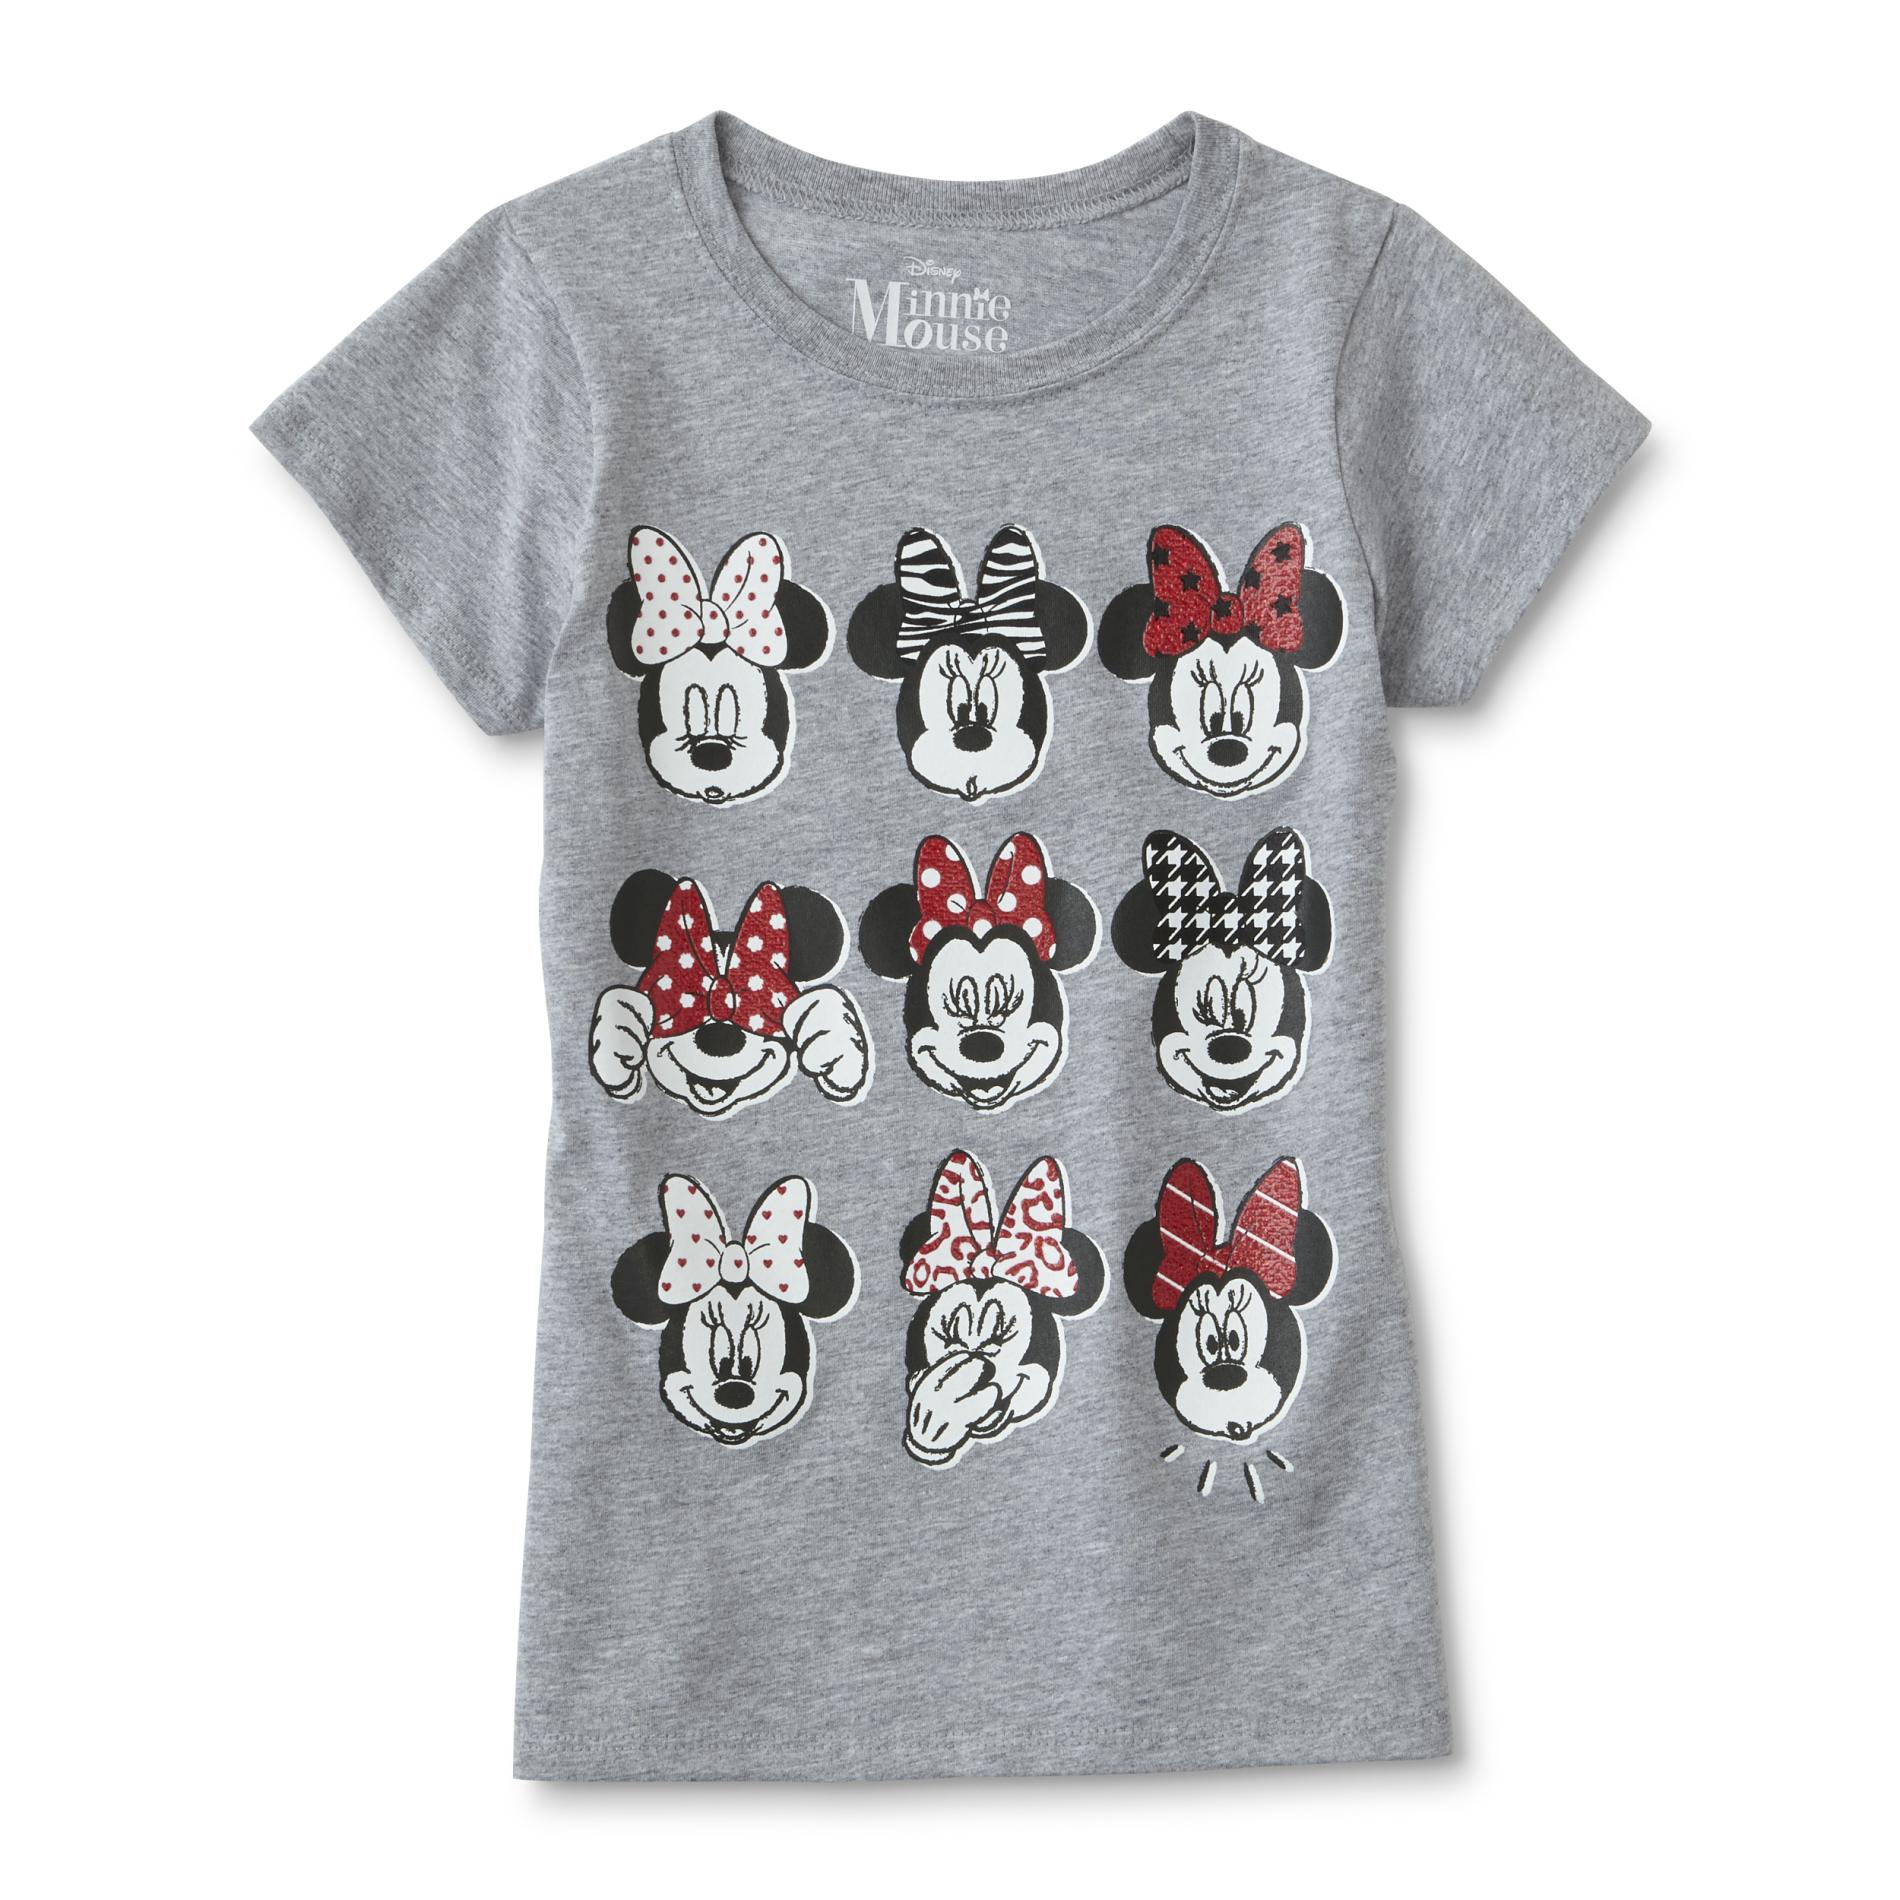 Disney Minnie Mouse Girls' Graphic T-Shirt